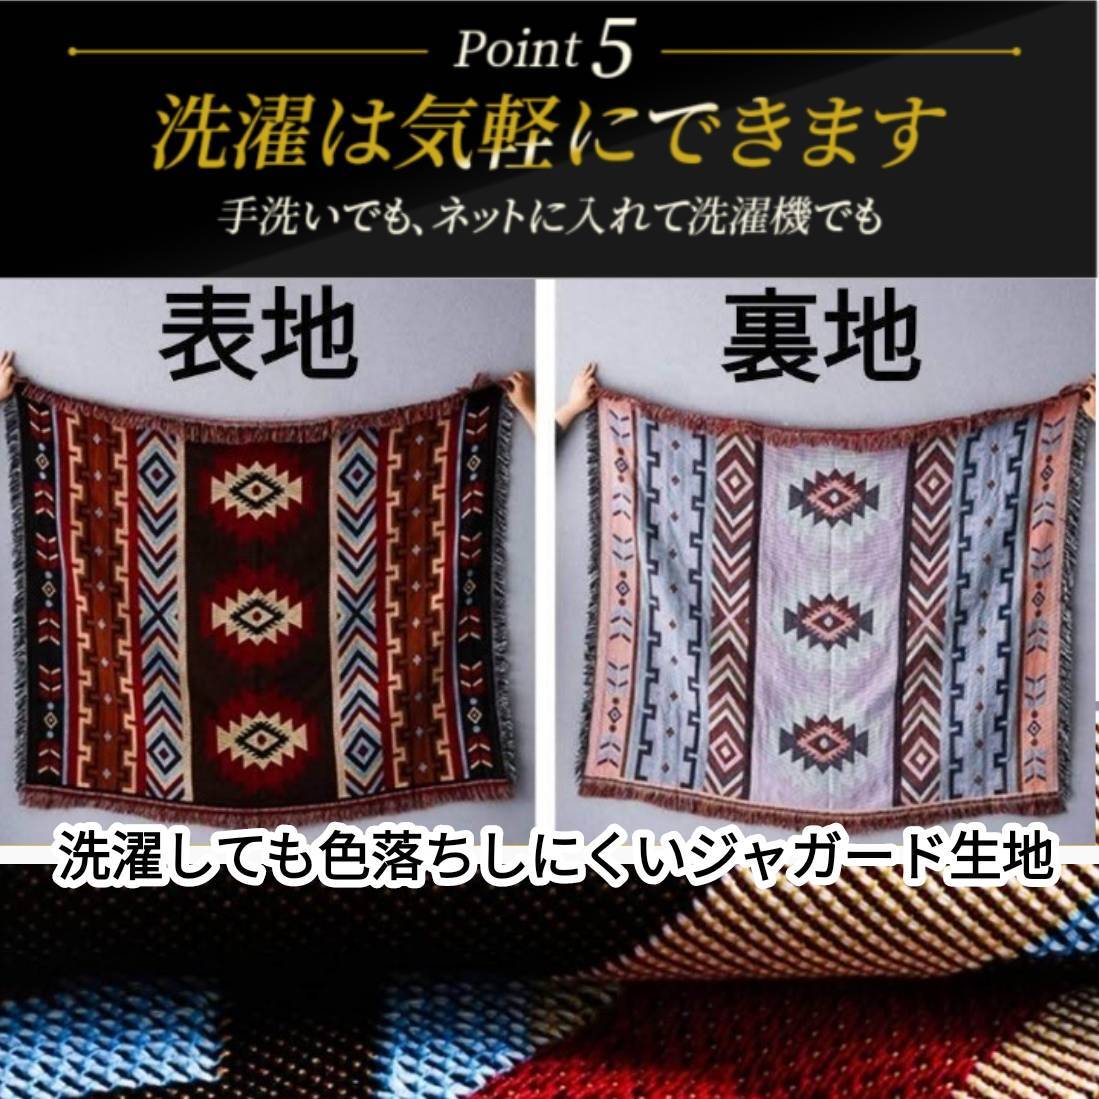  OLTE (Optical Line Transmission Equipment) ga pattern rug drill m camp outdoor gran pin g blanket rug sofa cover multi cover bed leisure seat red BBQ